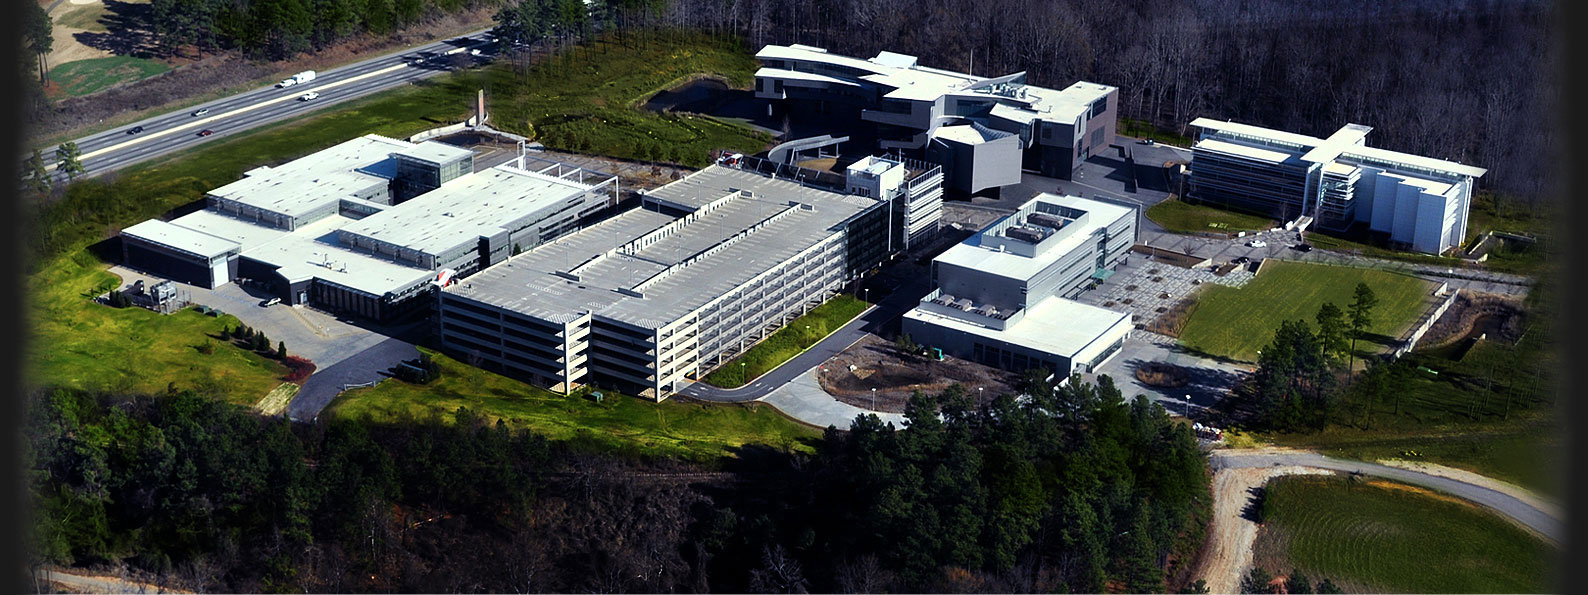 Bmw group information technology research center